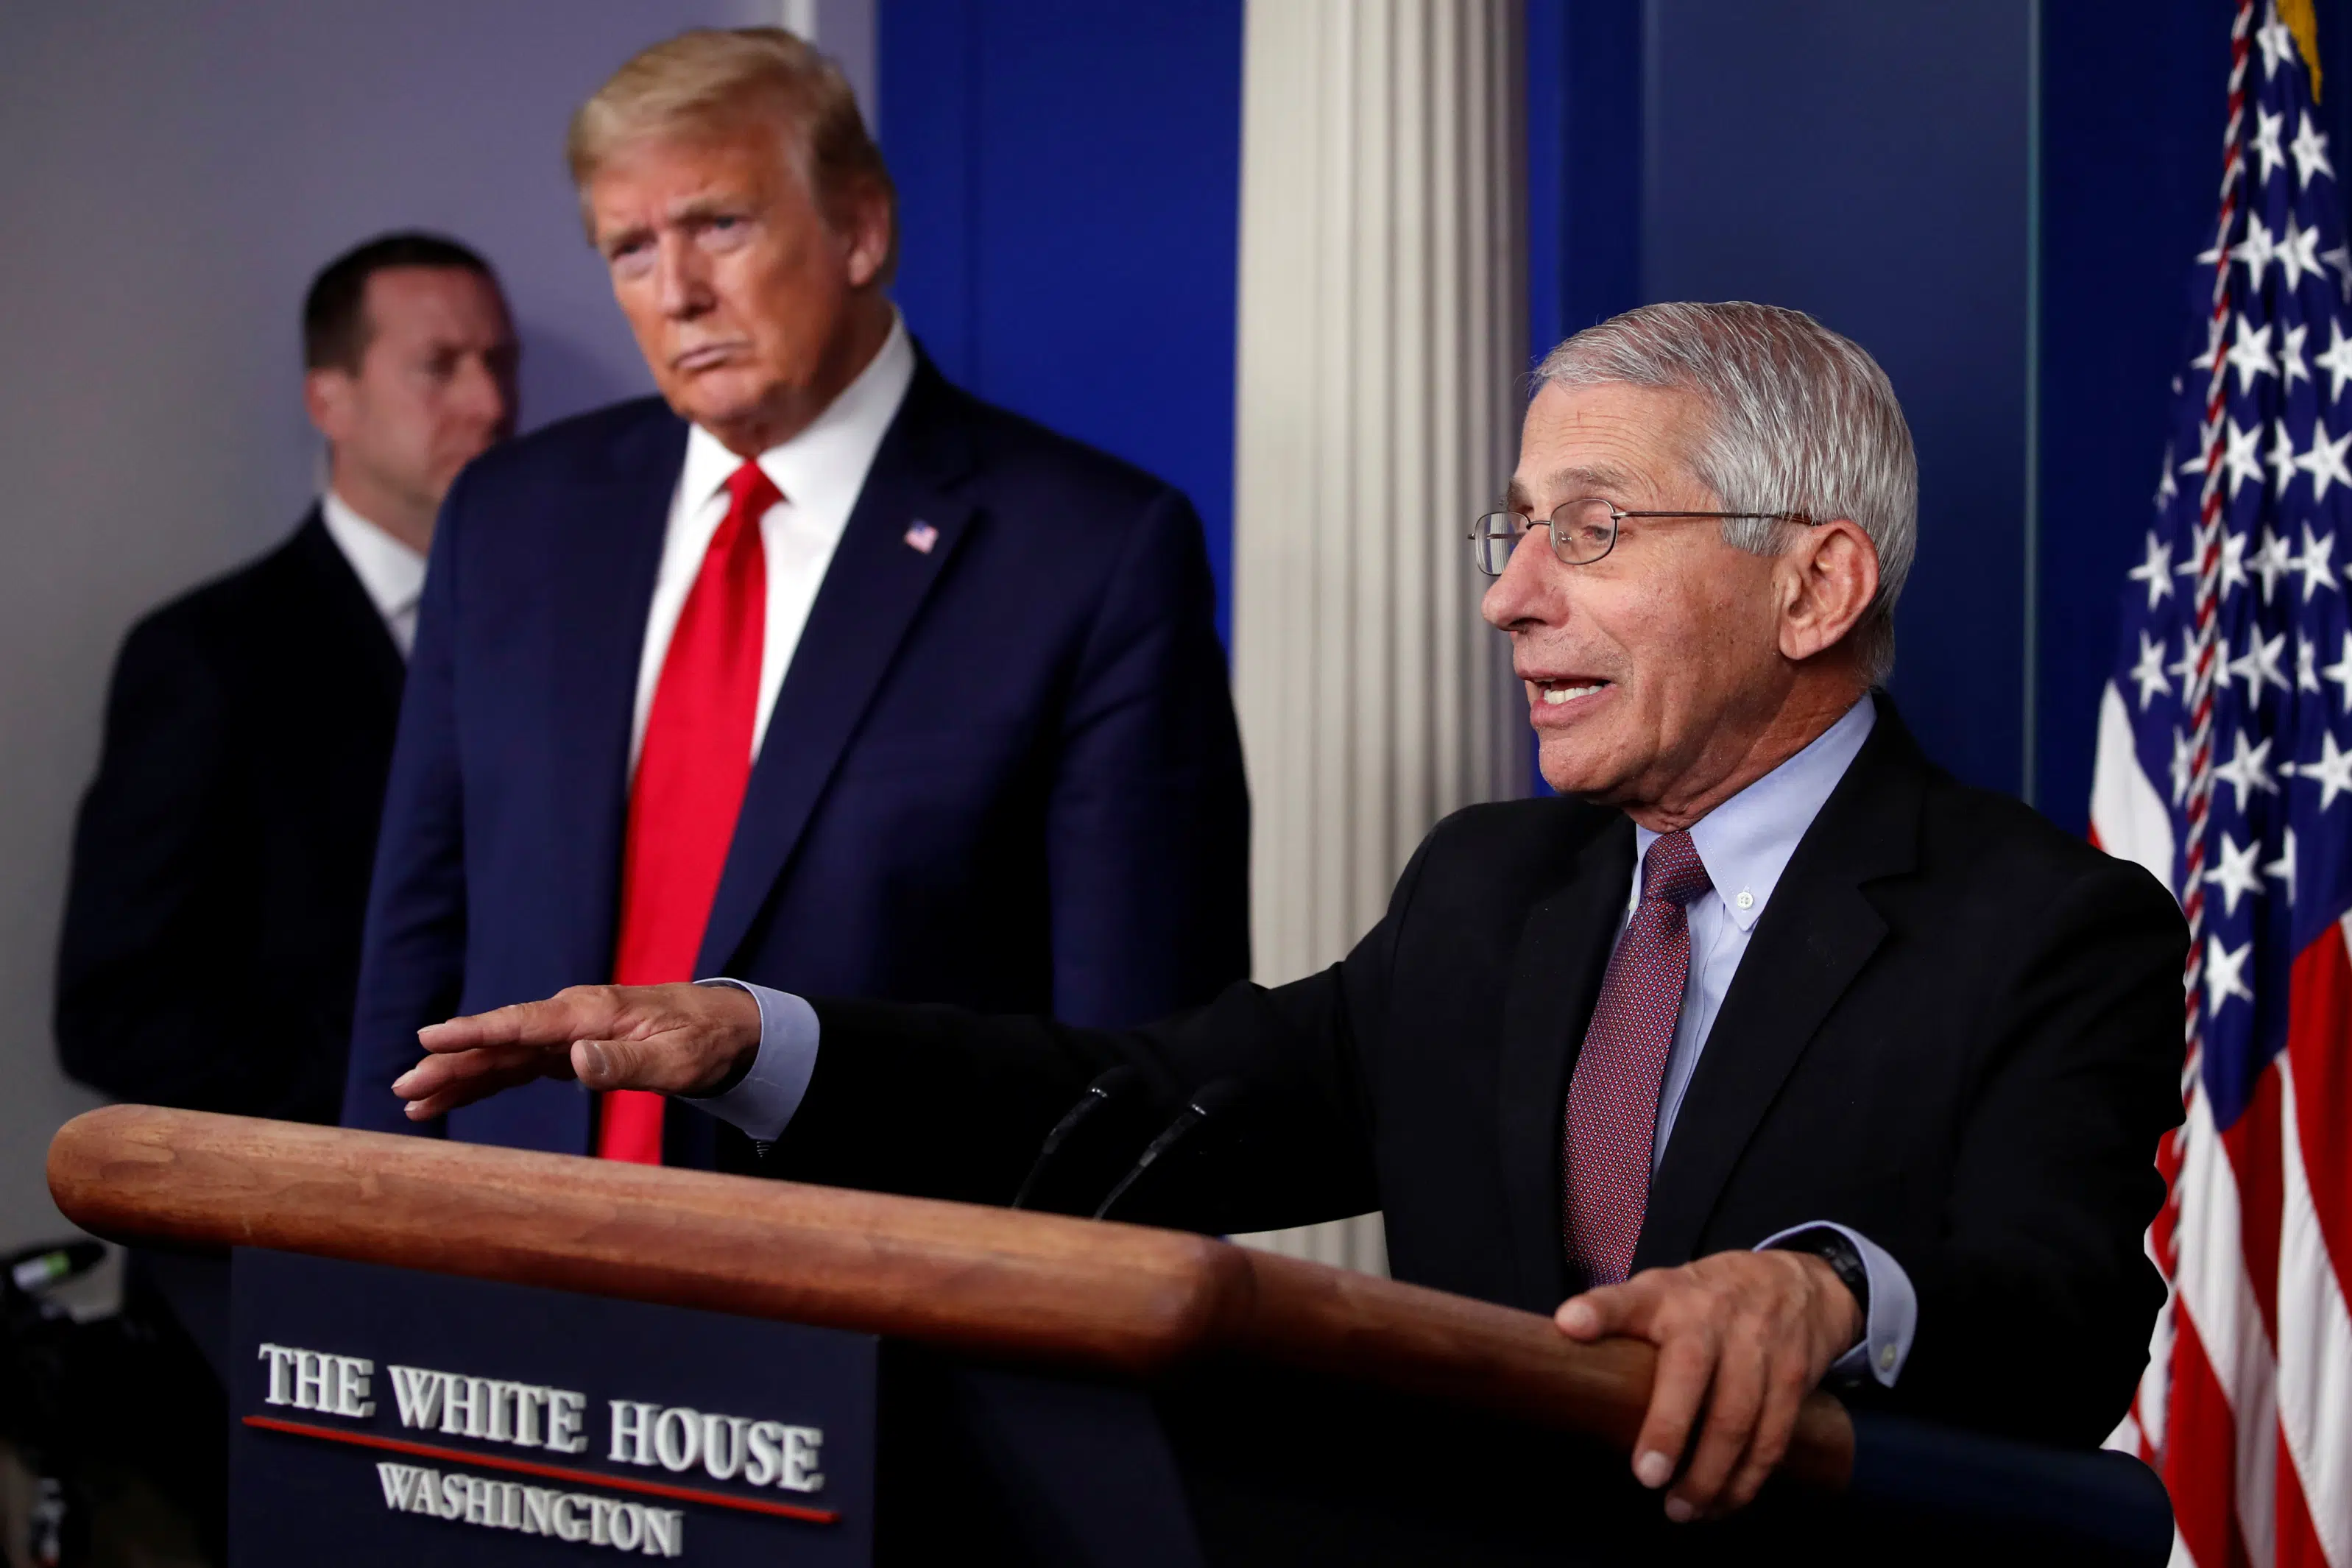 Trump Suggests to Supporters Dr. Fauci Will Be Fired After Election